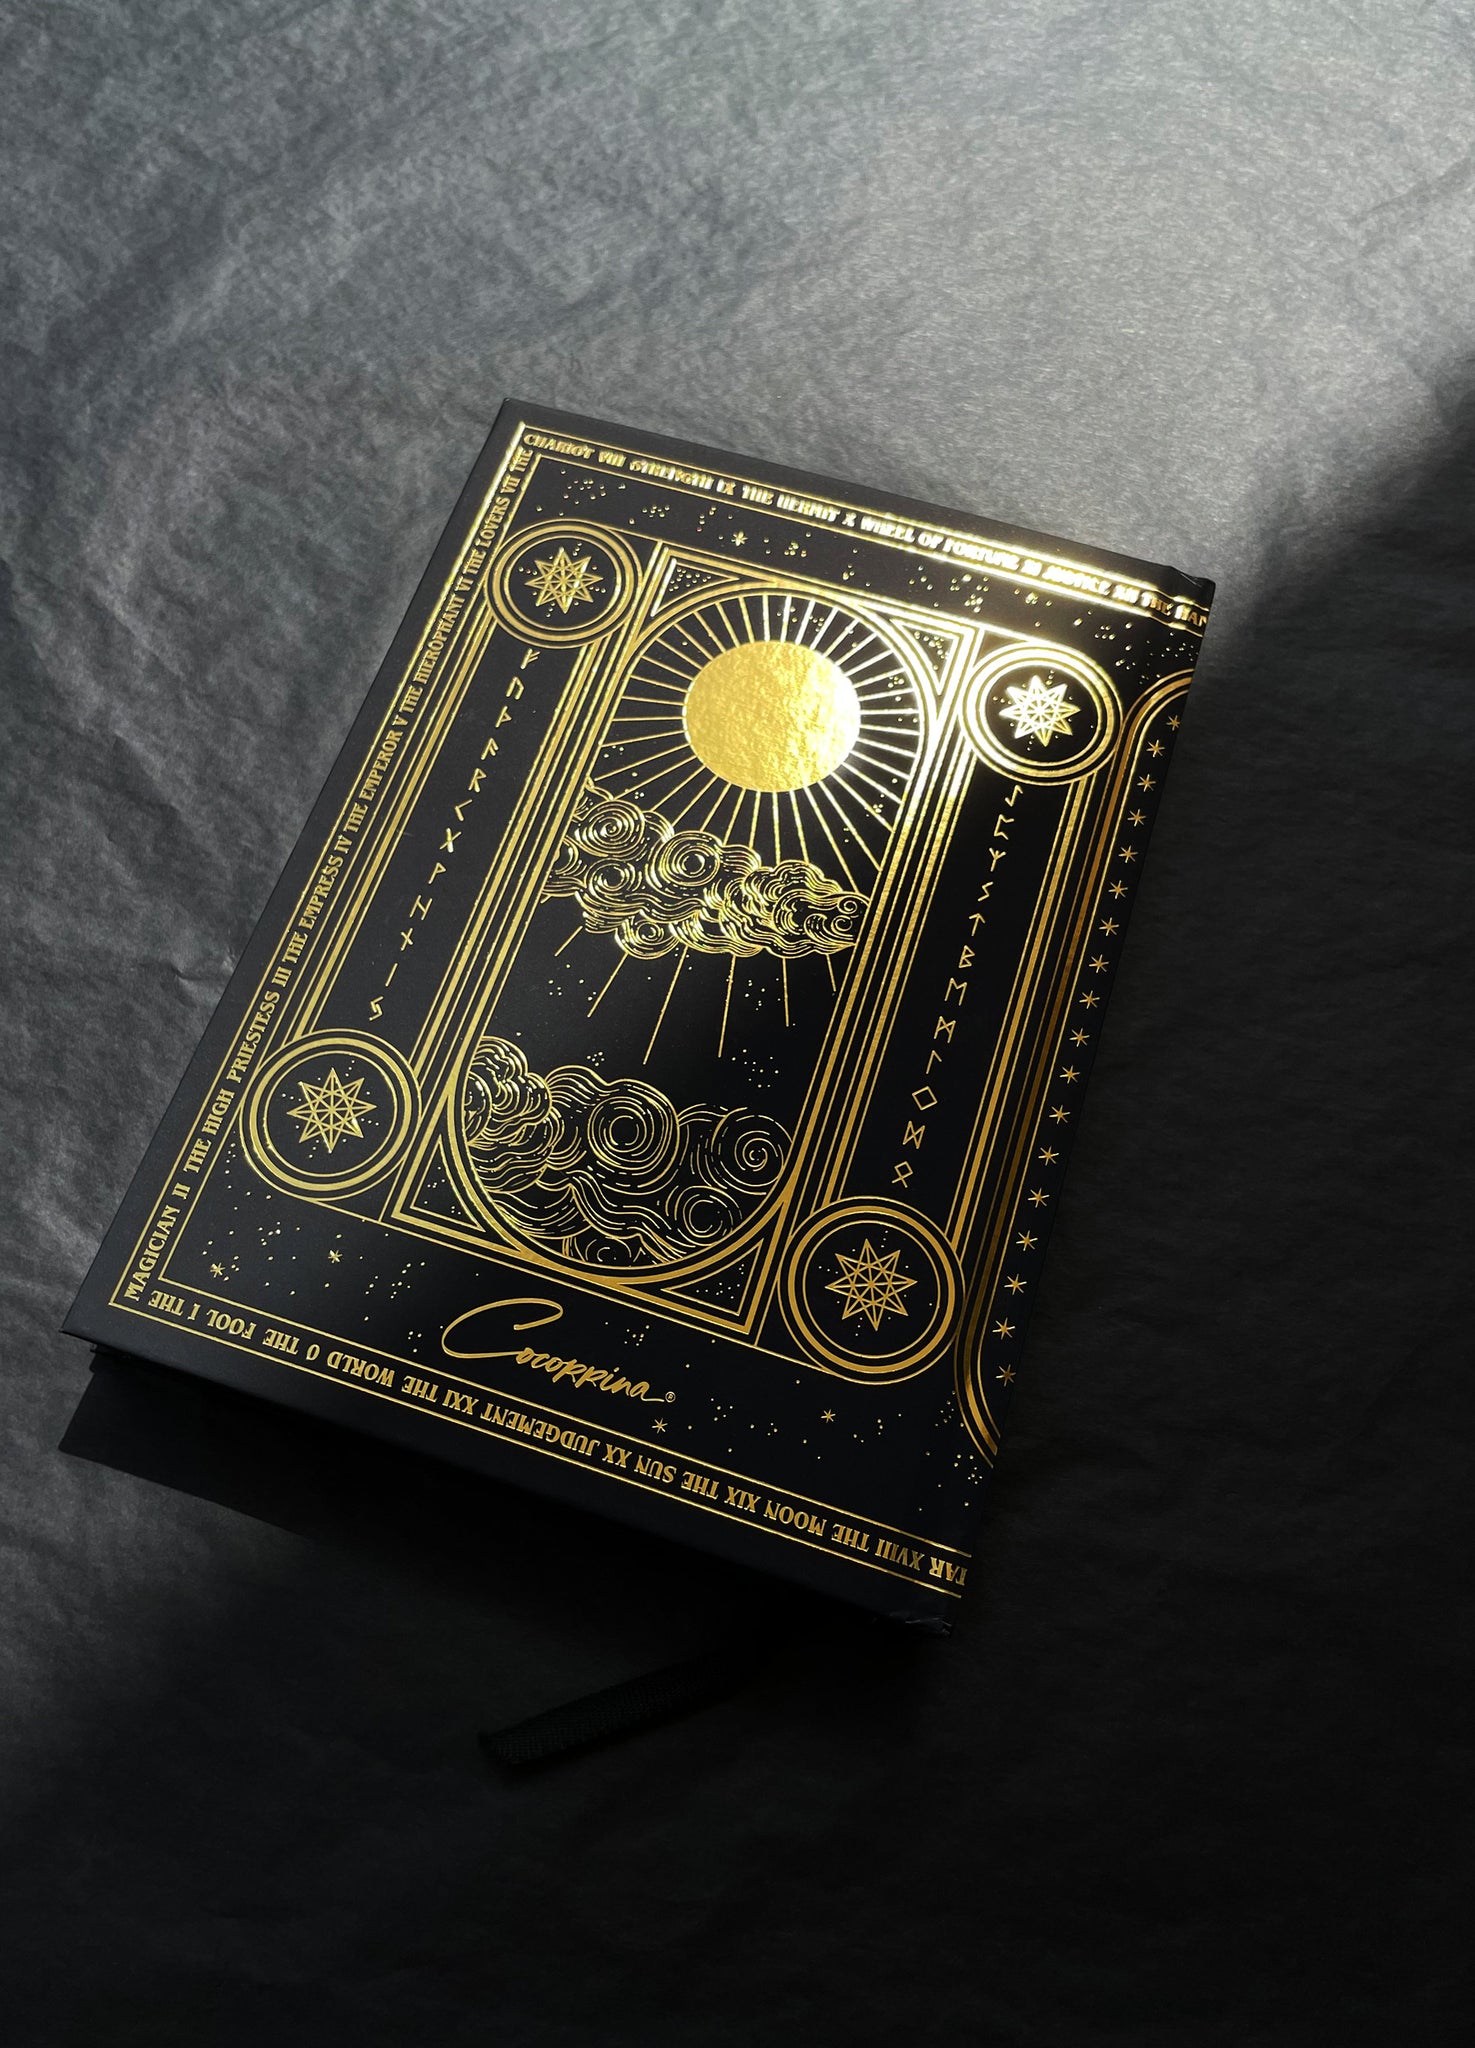 Tarot & Dream Journal Bundle. Gold foil and black hardcover books, themed journals by Cocorrina & Co